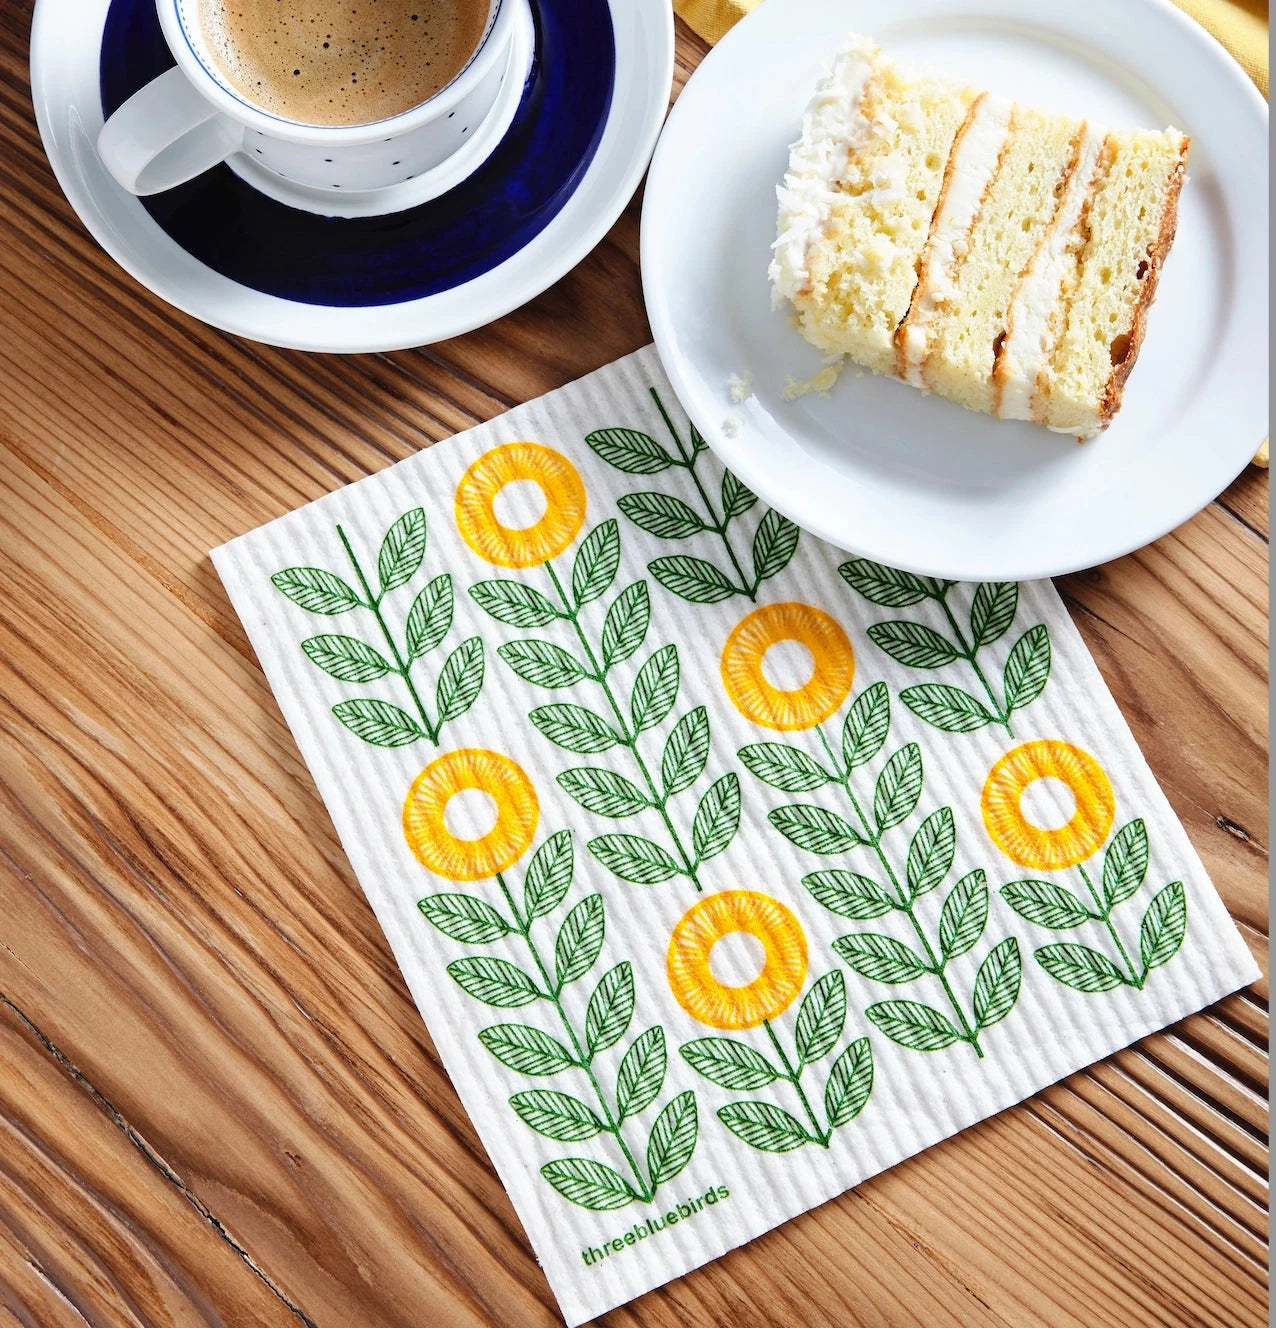 swedish dishcloth with sunflowers printed on it on a table 